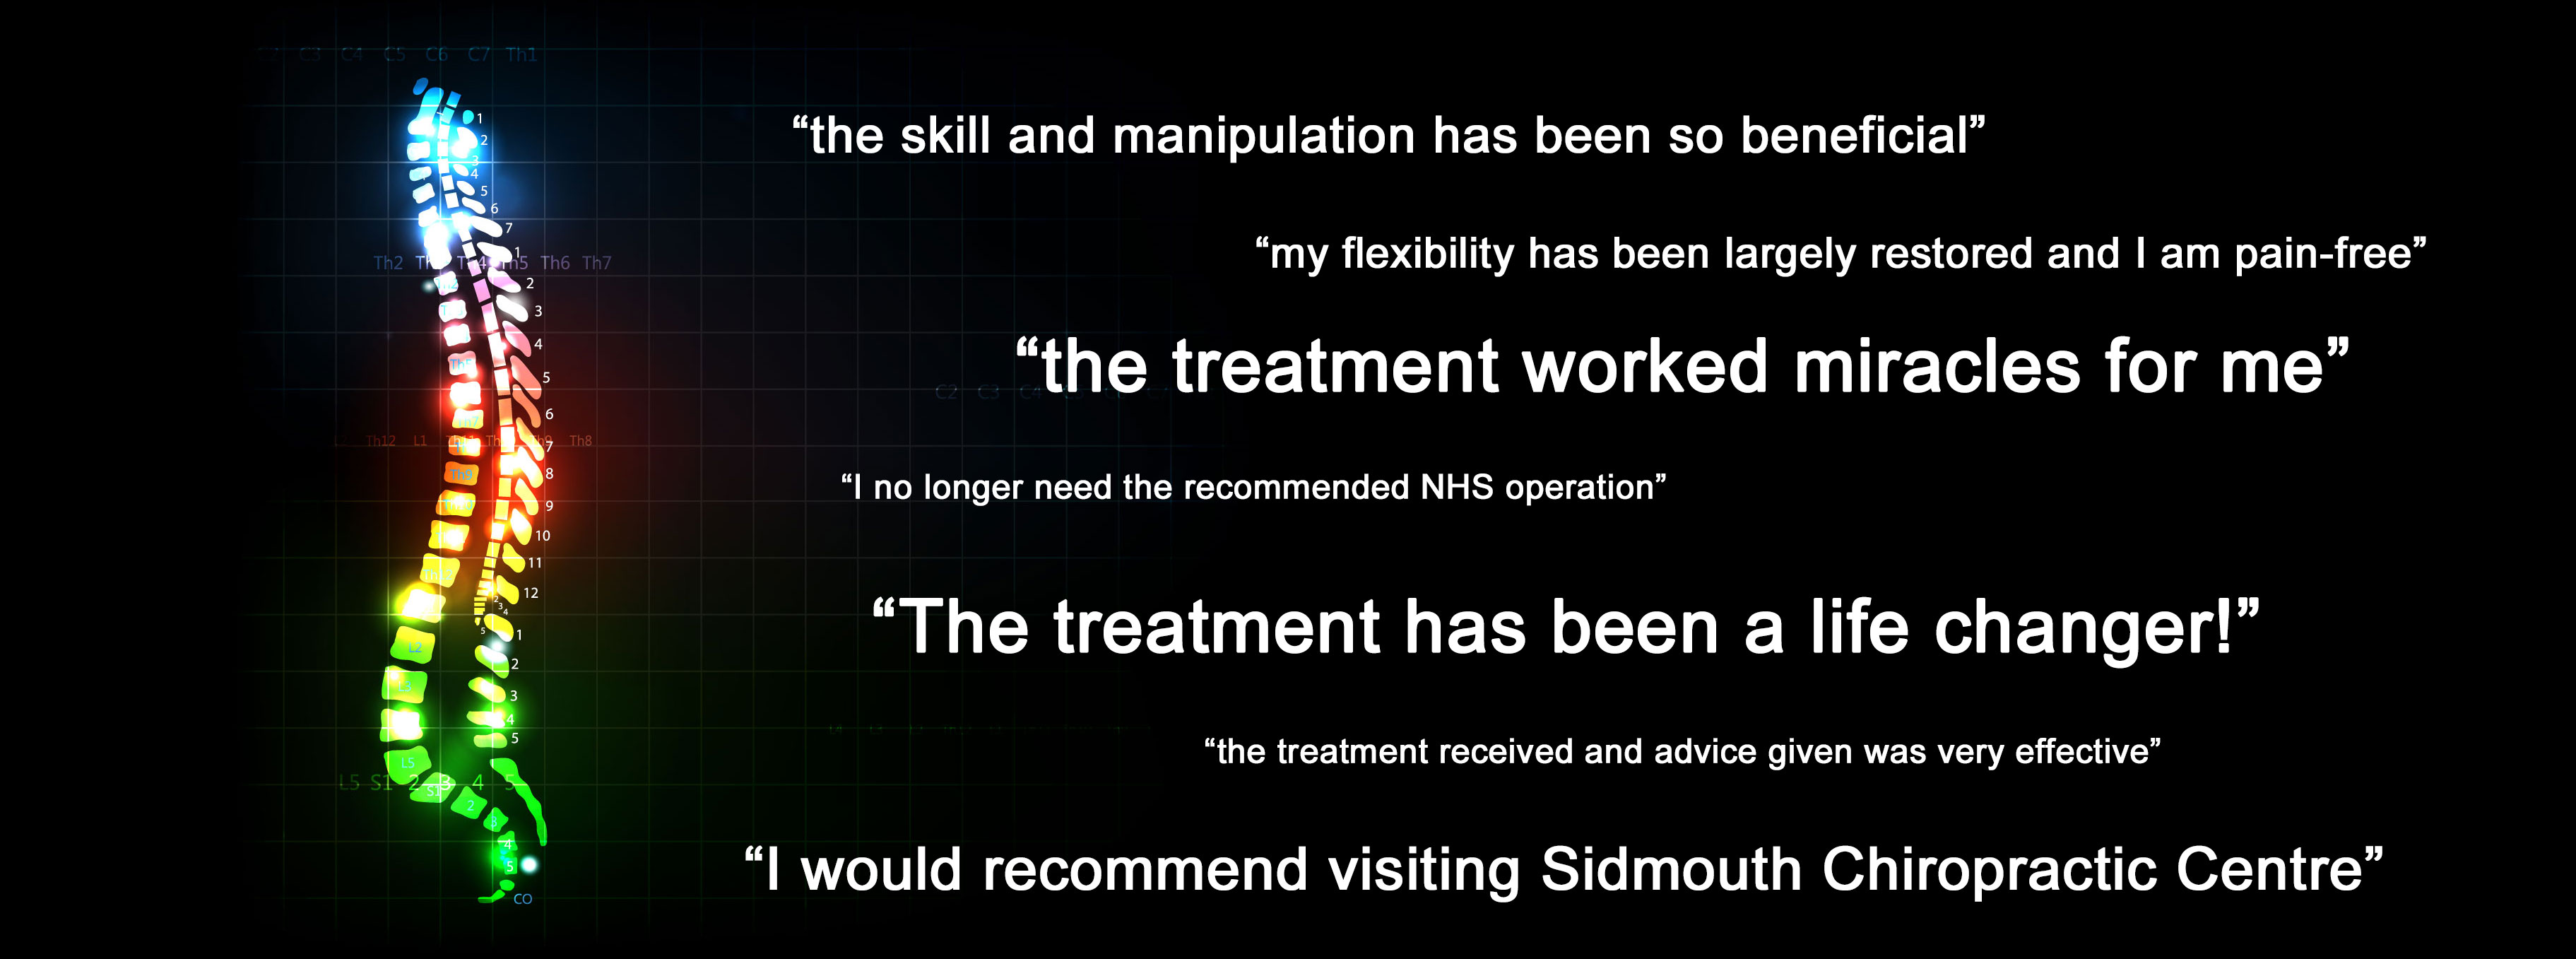 Reviews after treatment at Sidmouth Chiropractic Clinic